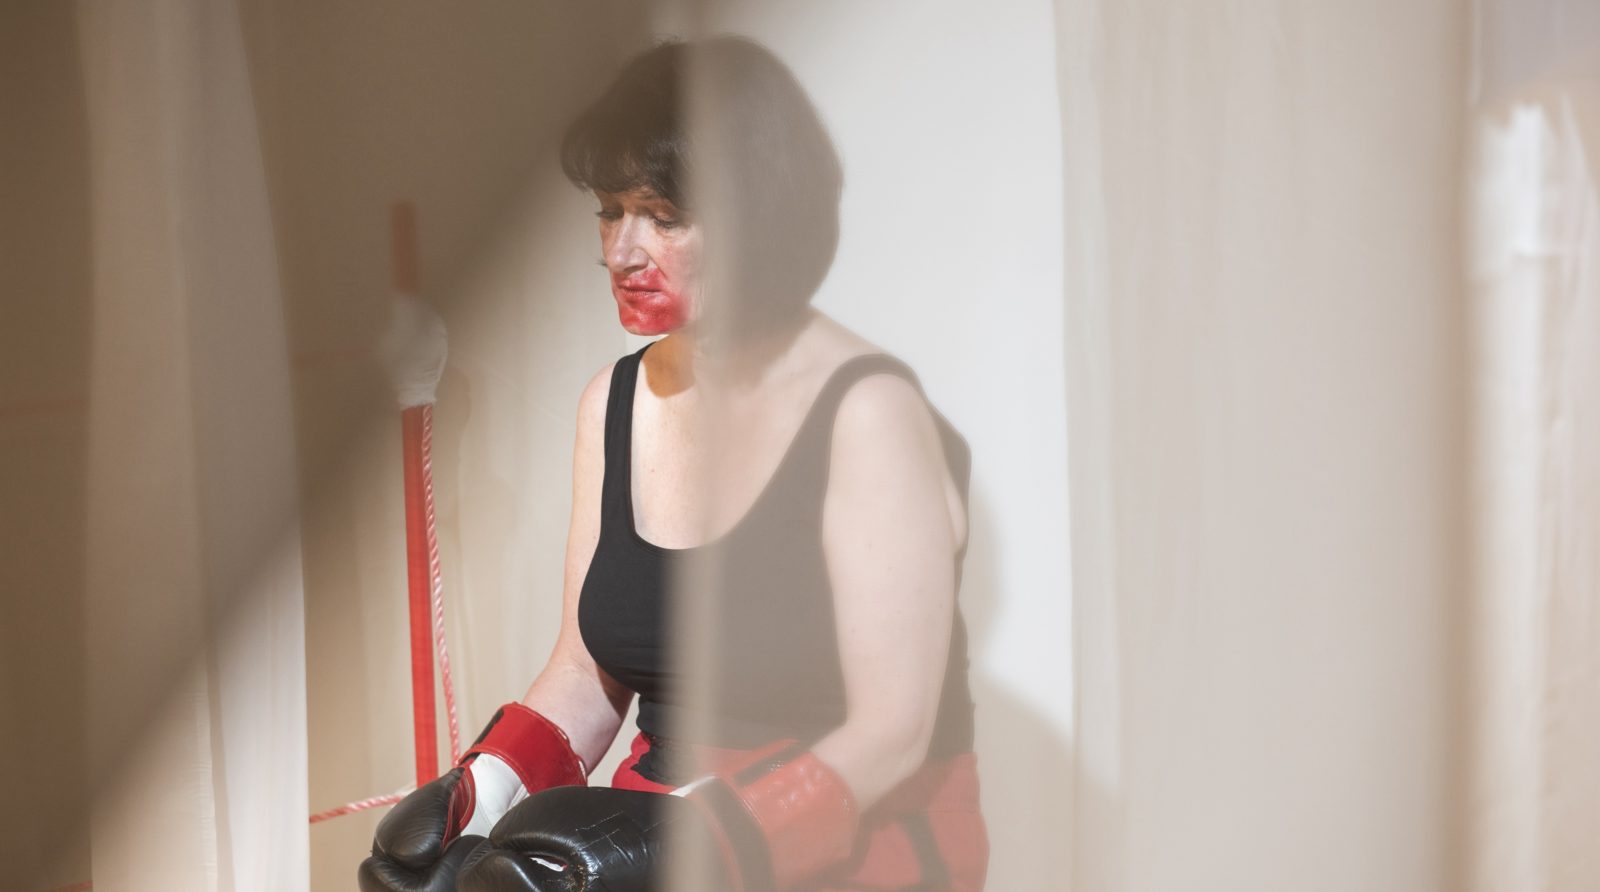 A woman with short brown hair is photographed wearing boxing gloves and has red lipstick smudged all around her mouth. She looks down and her expression is sad.